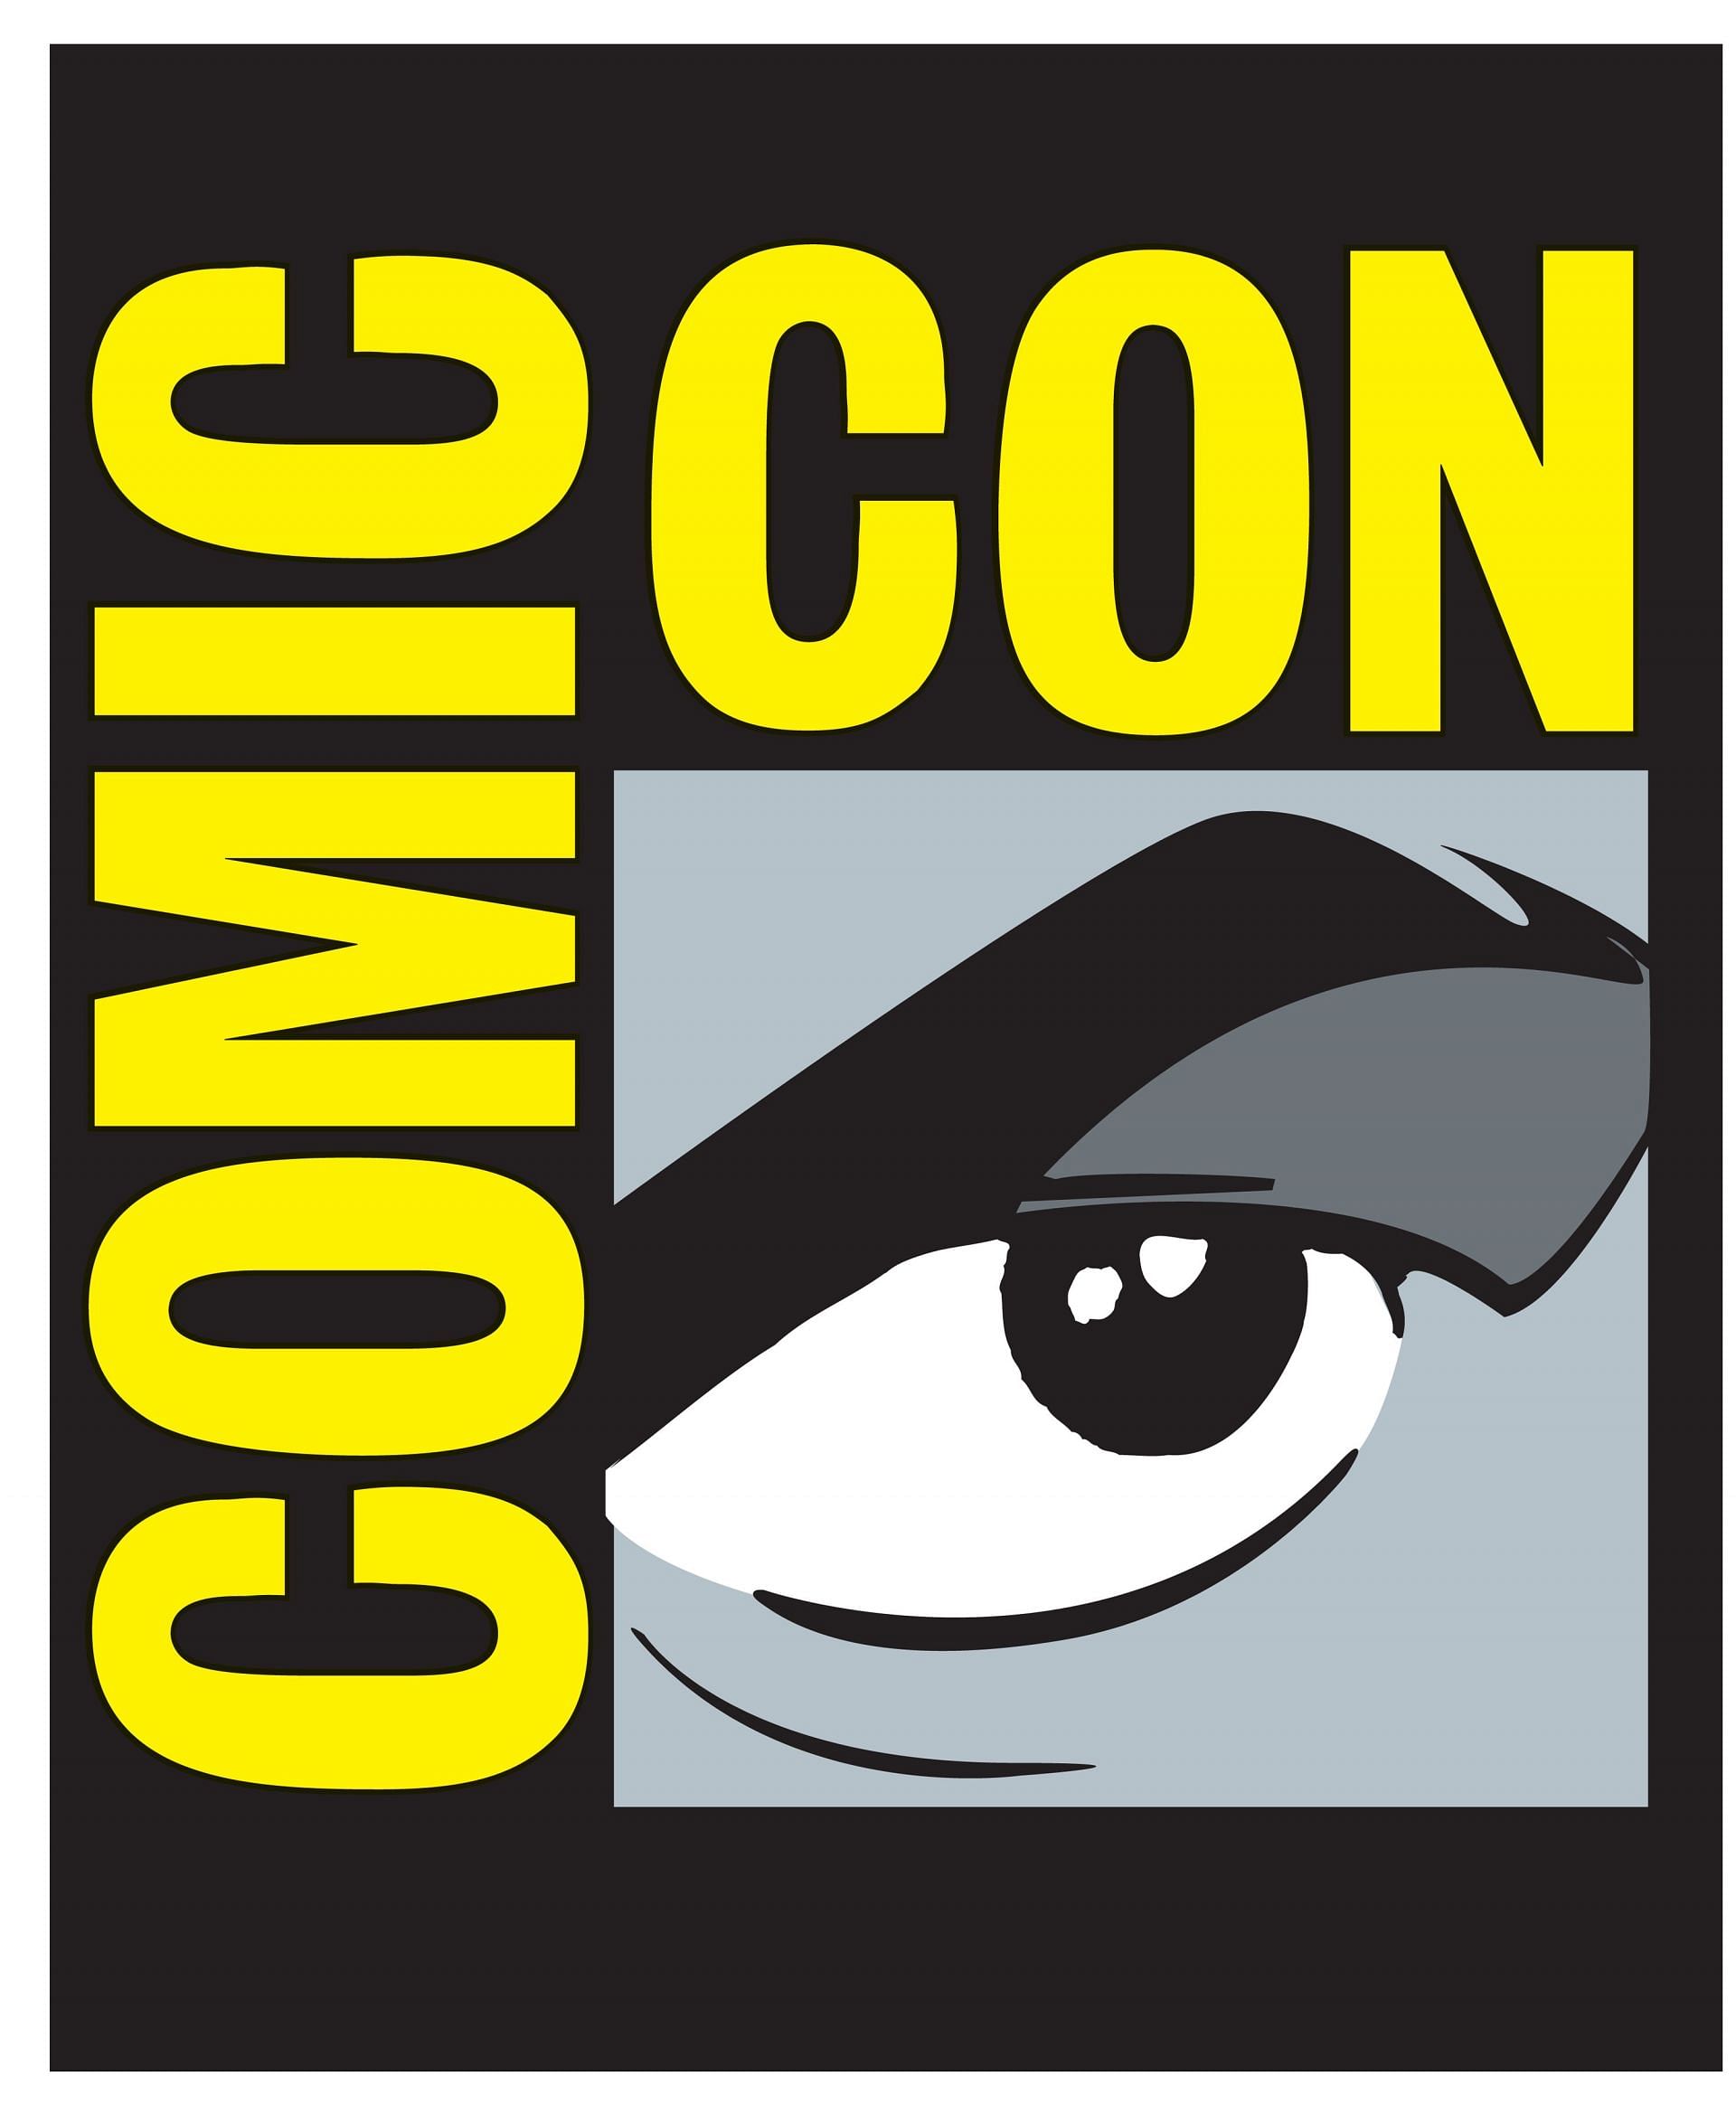 San Diego Comic-Con 2023 did not have as many major movie and TV announcements as in previous years. (Image Via Comic Con)